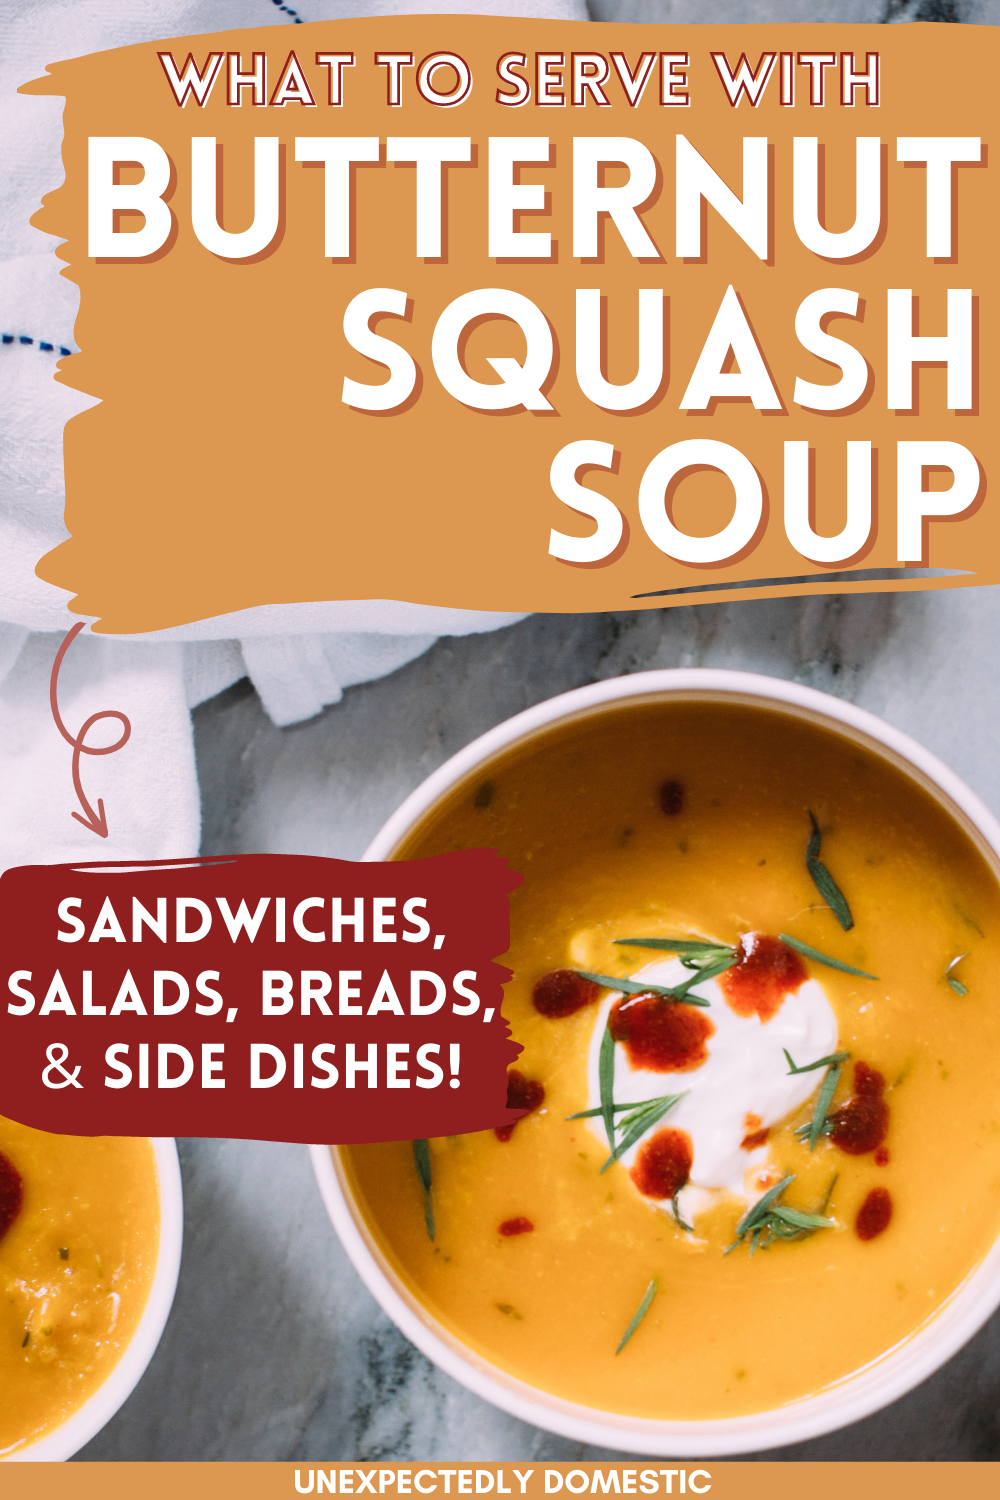 What to serve with butternut squash soup! These sandwiches, salads, proteins, side dishes, and breads turn soup into a hearty, fabulous comfort food meal.